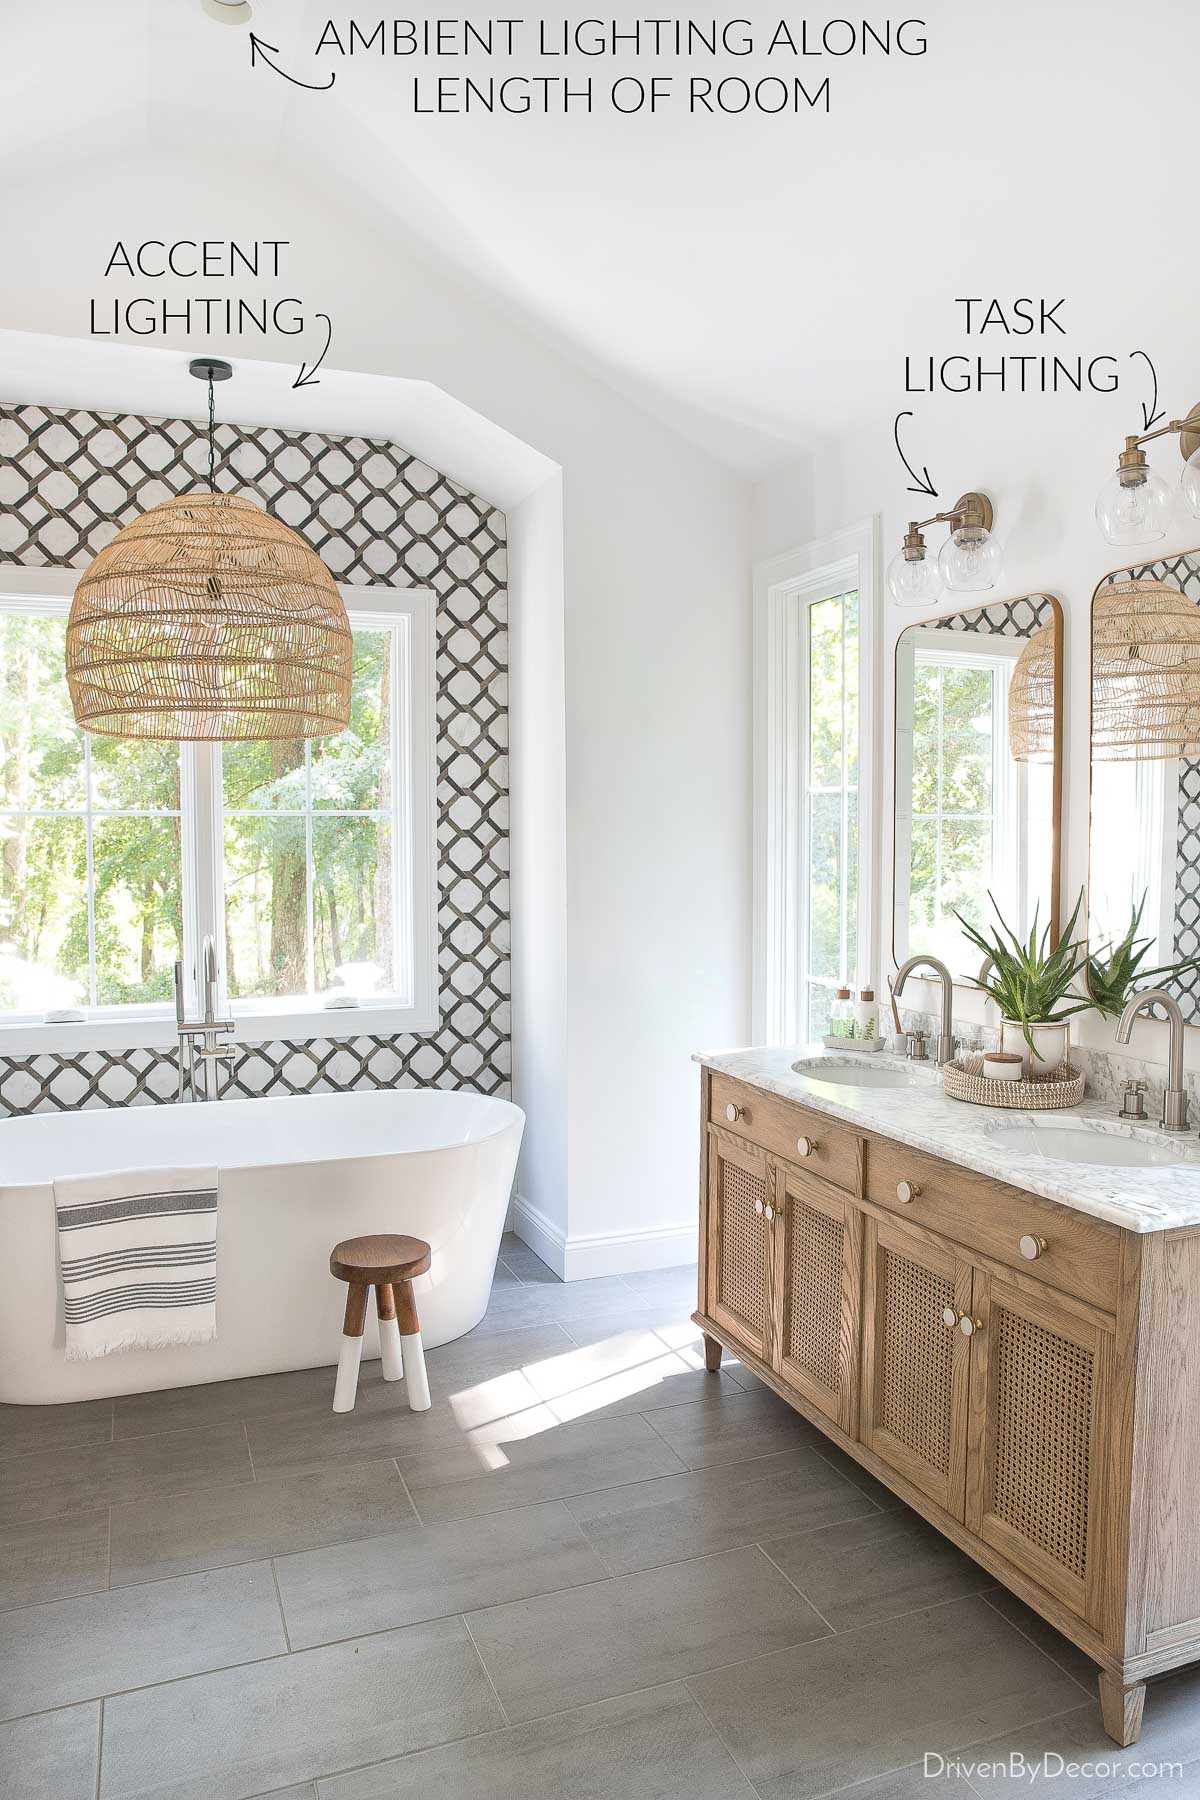 Different layers of light in the bathroom - ambient, task, and accent